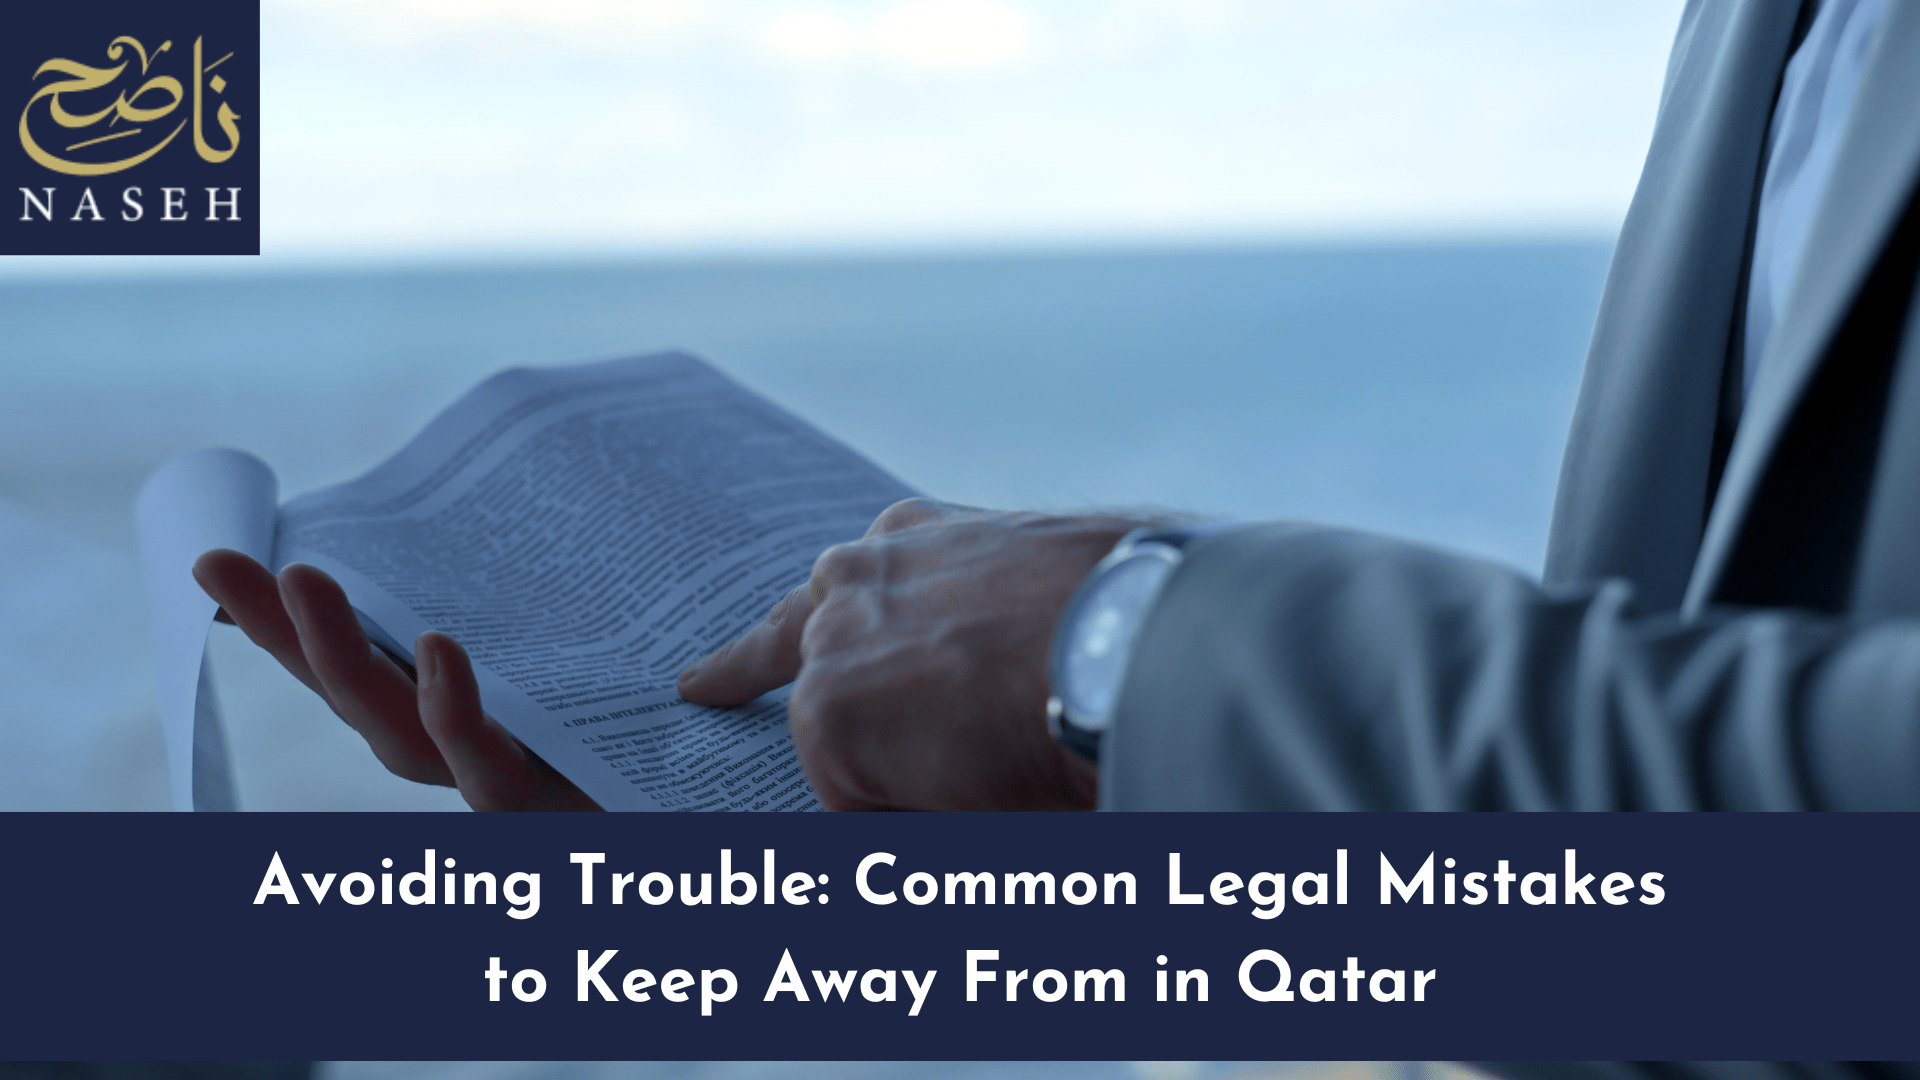 Avoiding Trouble: Common Legal Mistakes to Keep Away From in Qatar